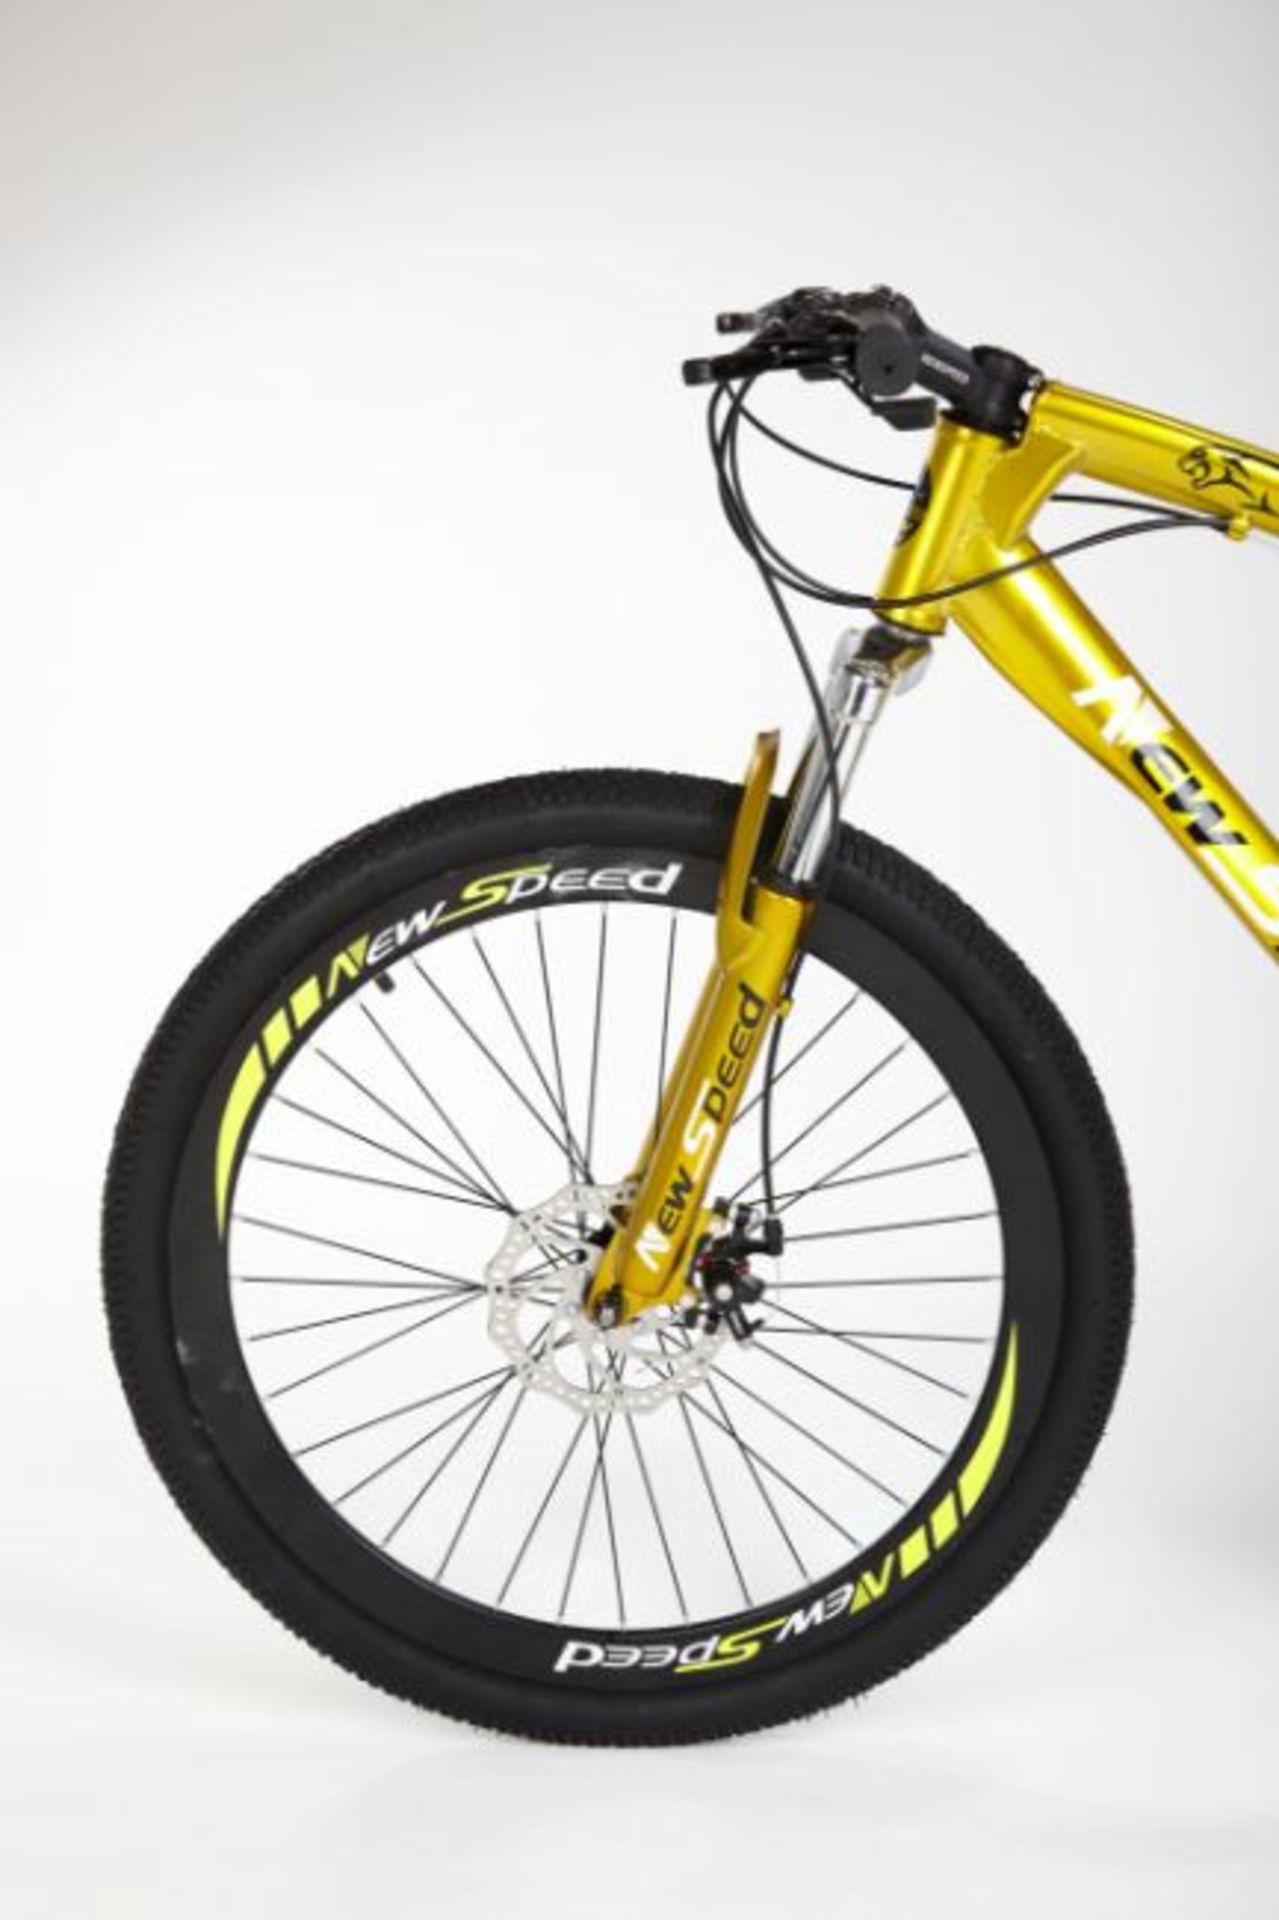 BRAND NEW NEW SPEED 21 GEARS STUNNING SUSPENSION GOLD COLOURED MOUNTAIN BIKE - Image 5 of 11